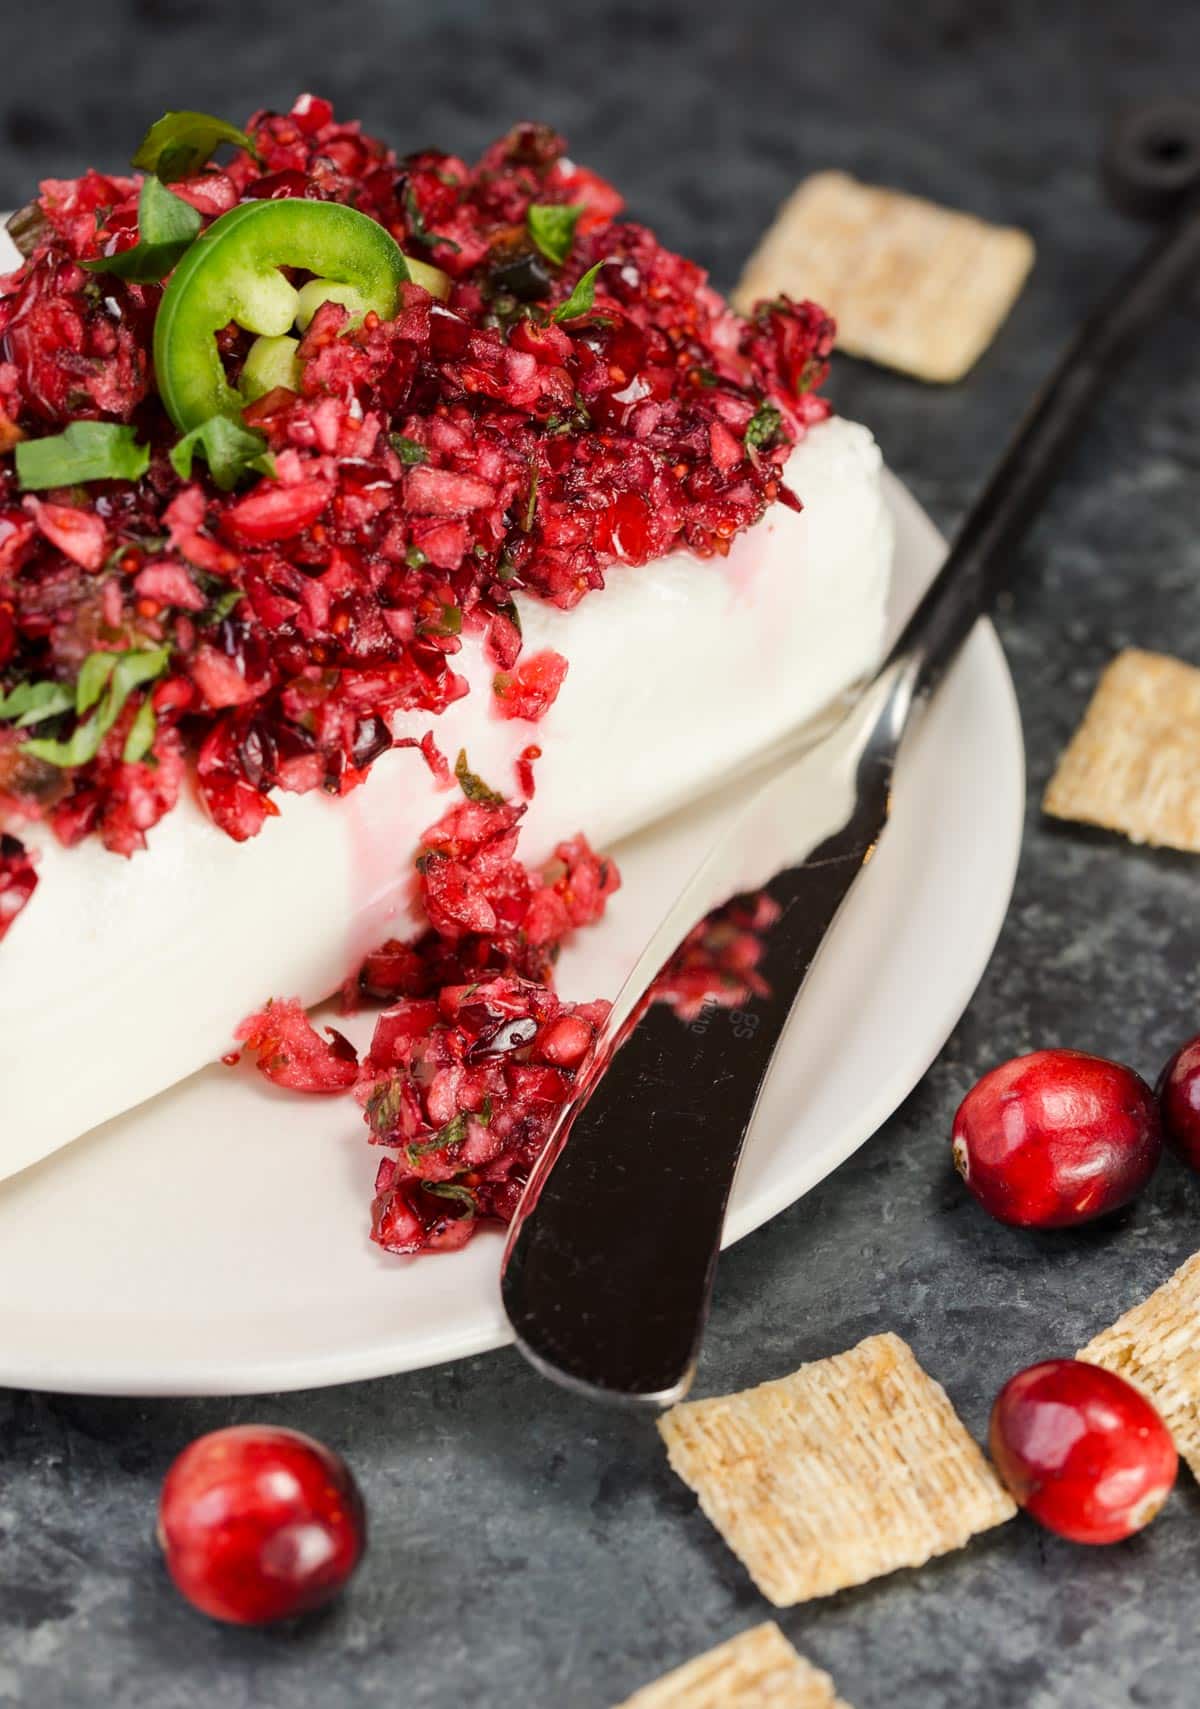 Spicy Cranberry Salsa with Cream Cheese - Garnish with Lemon